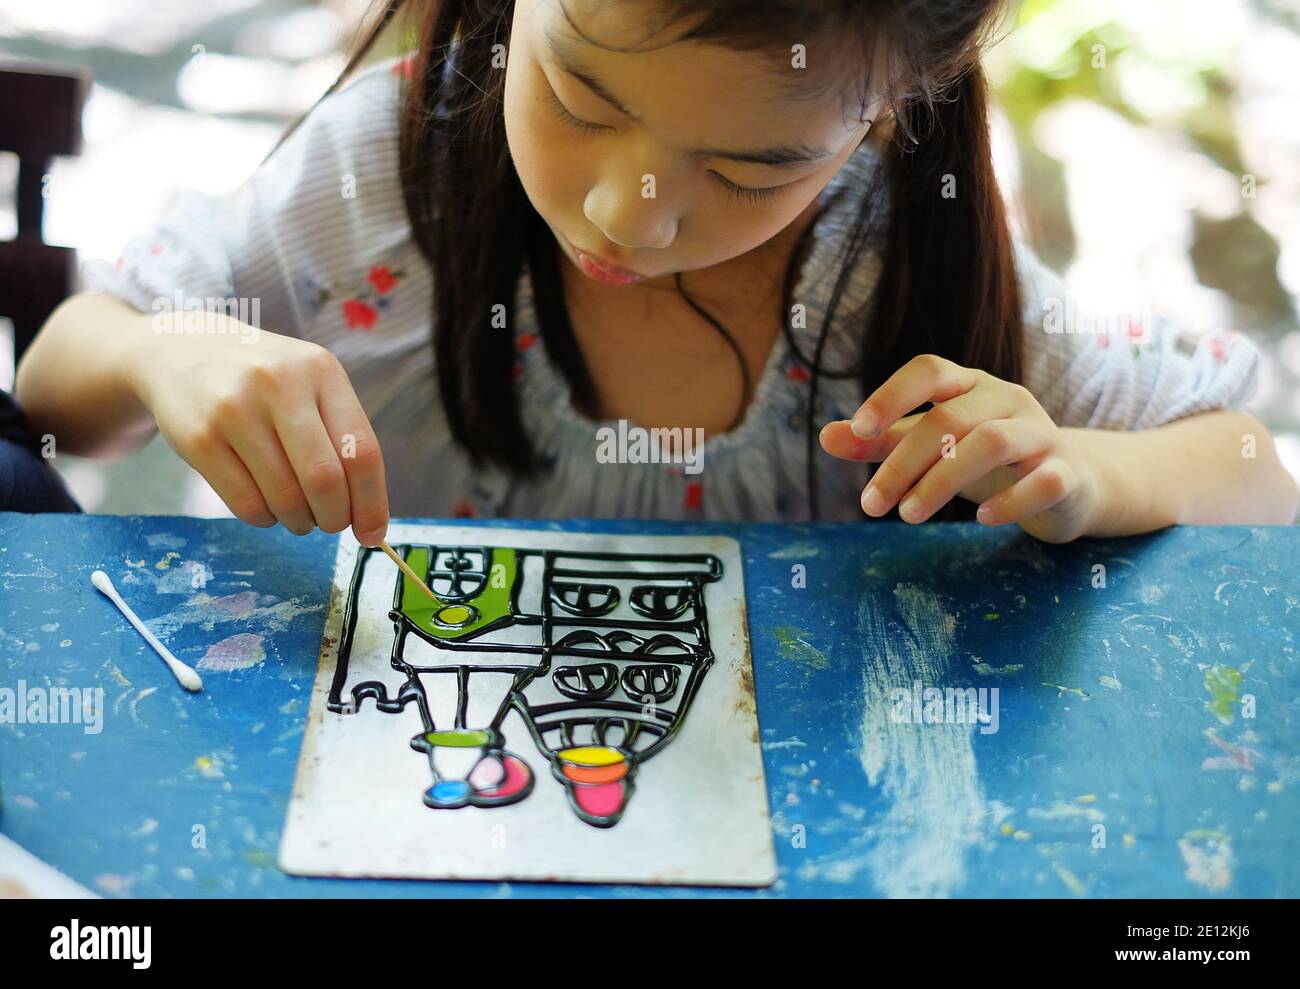 A cute Asian girl working on her art project at a daycare center, using colorful acrylic paints to draw a castle. Stock Photo